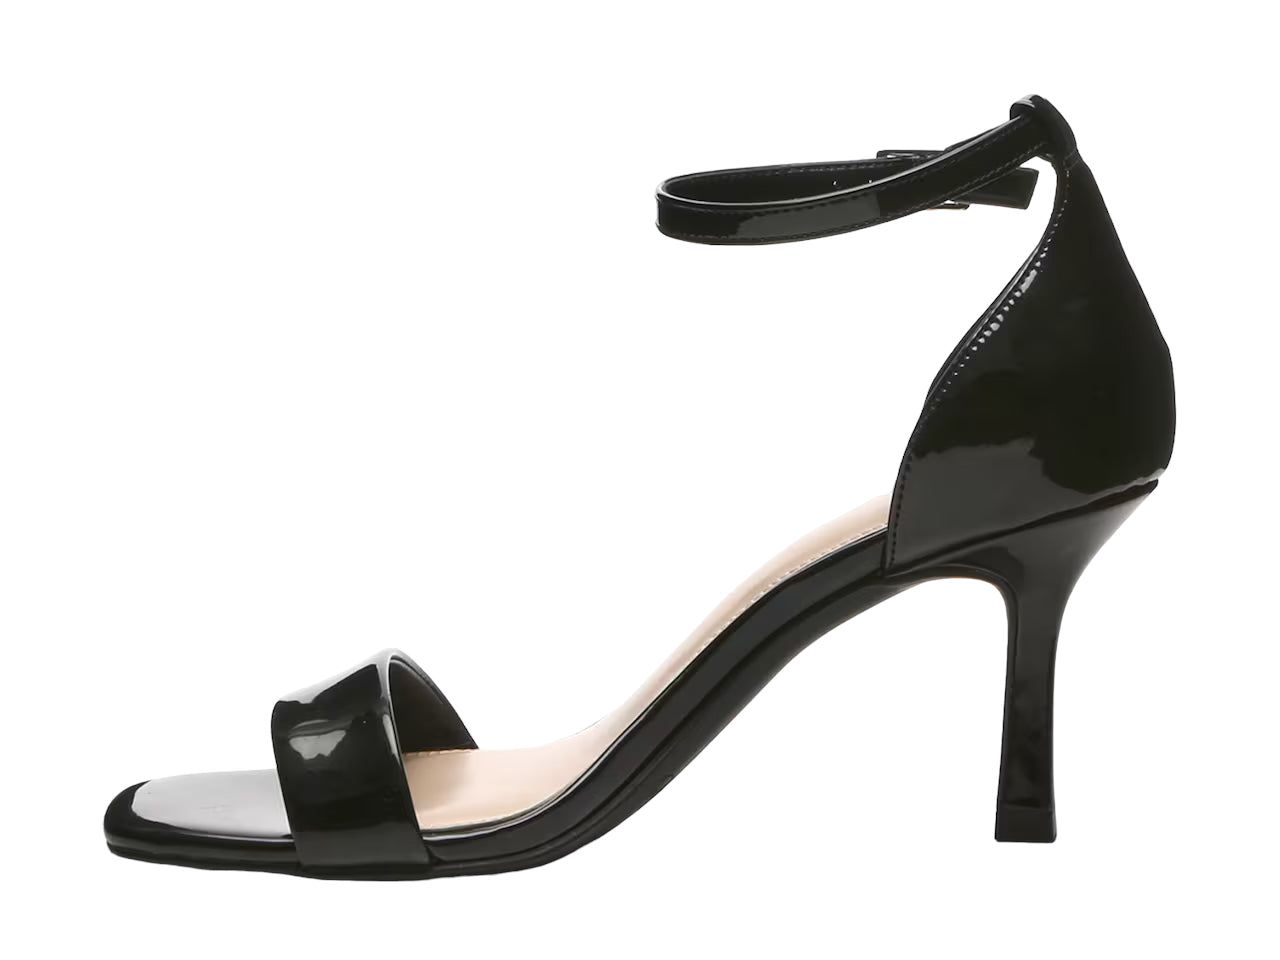 KELLY & KATIE BLACK PATENT ANKLE STRAP BARELY THERE SANDAL